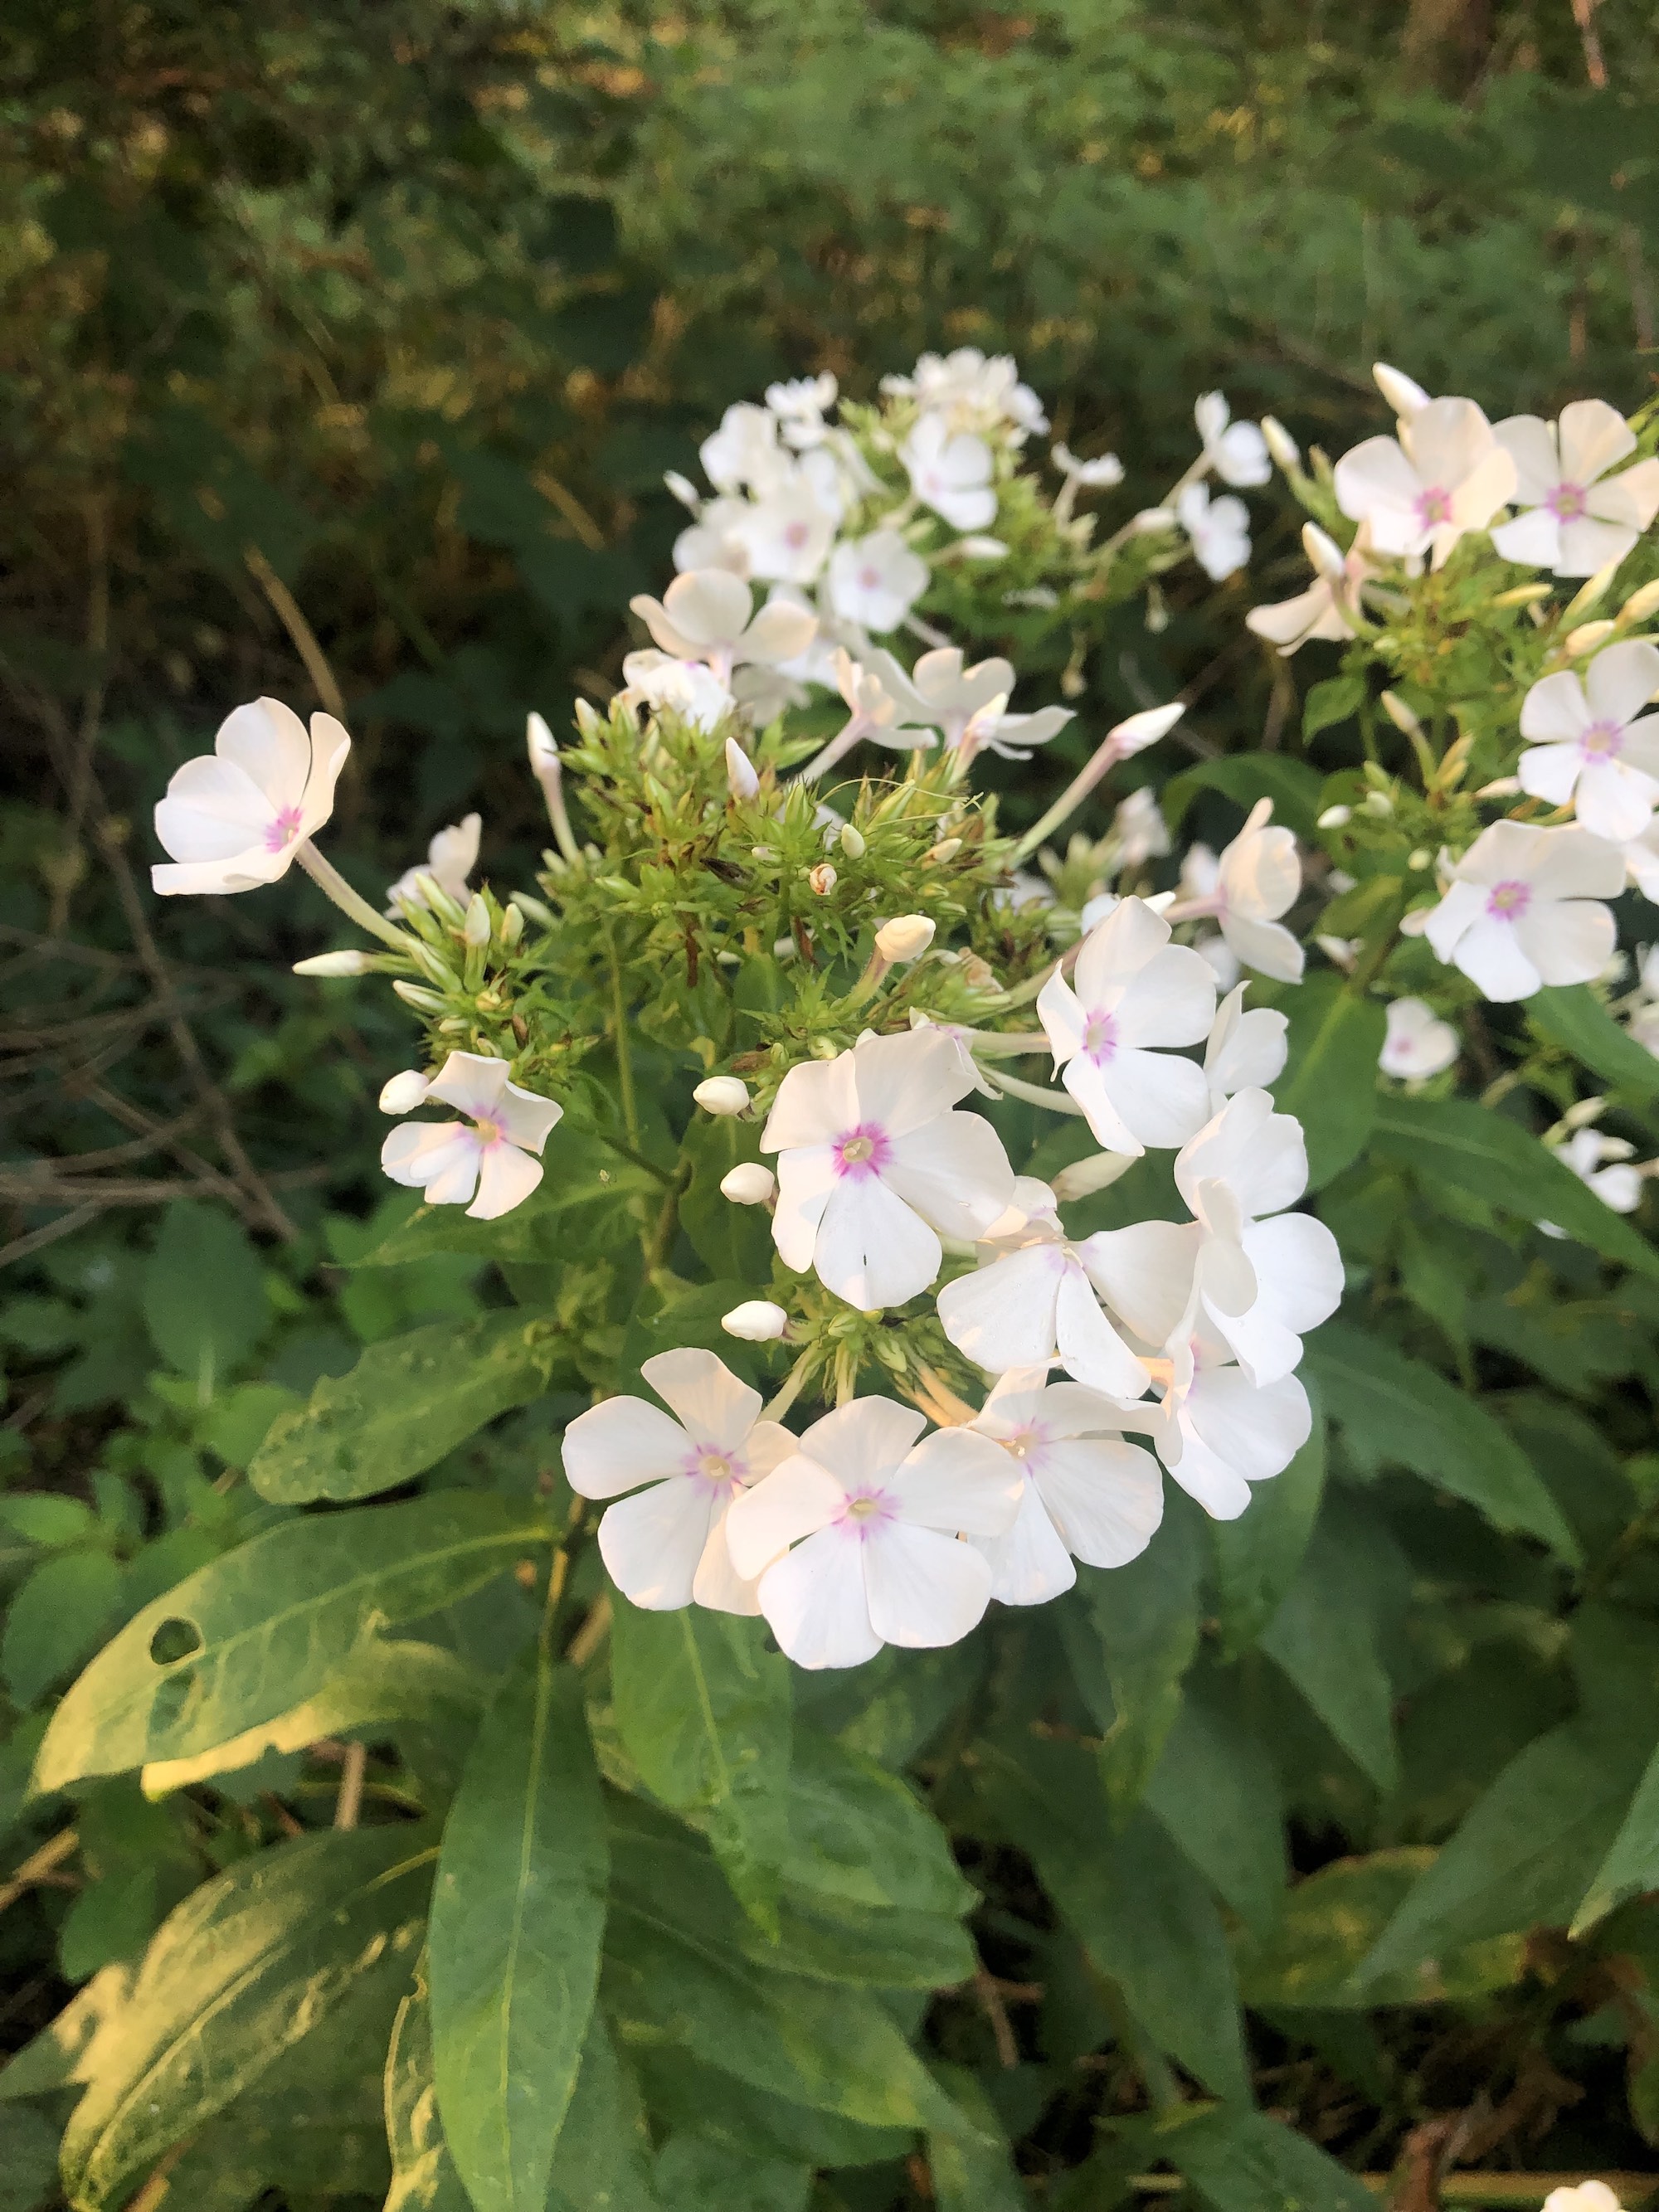 Tall Garden Phlox by Duck Pond on July 31, 201.